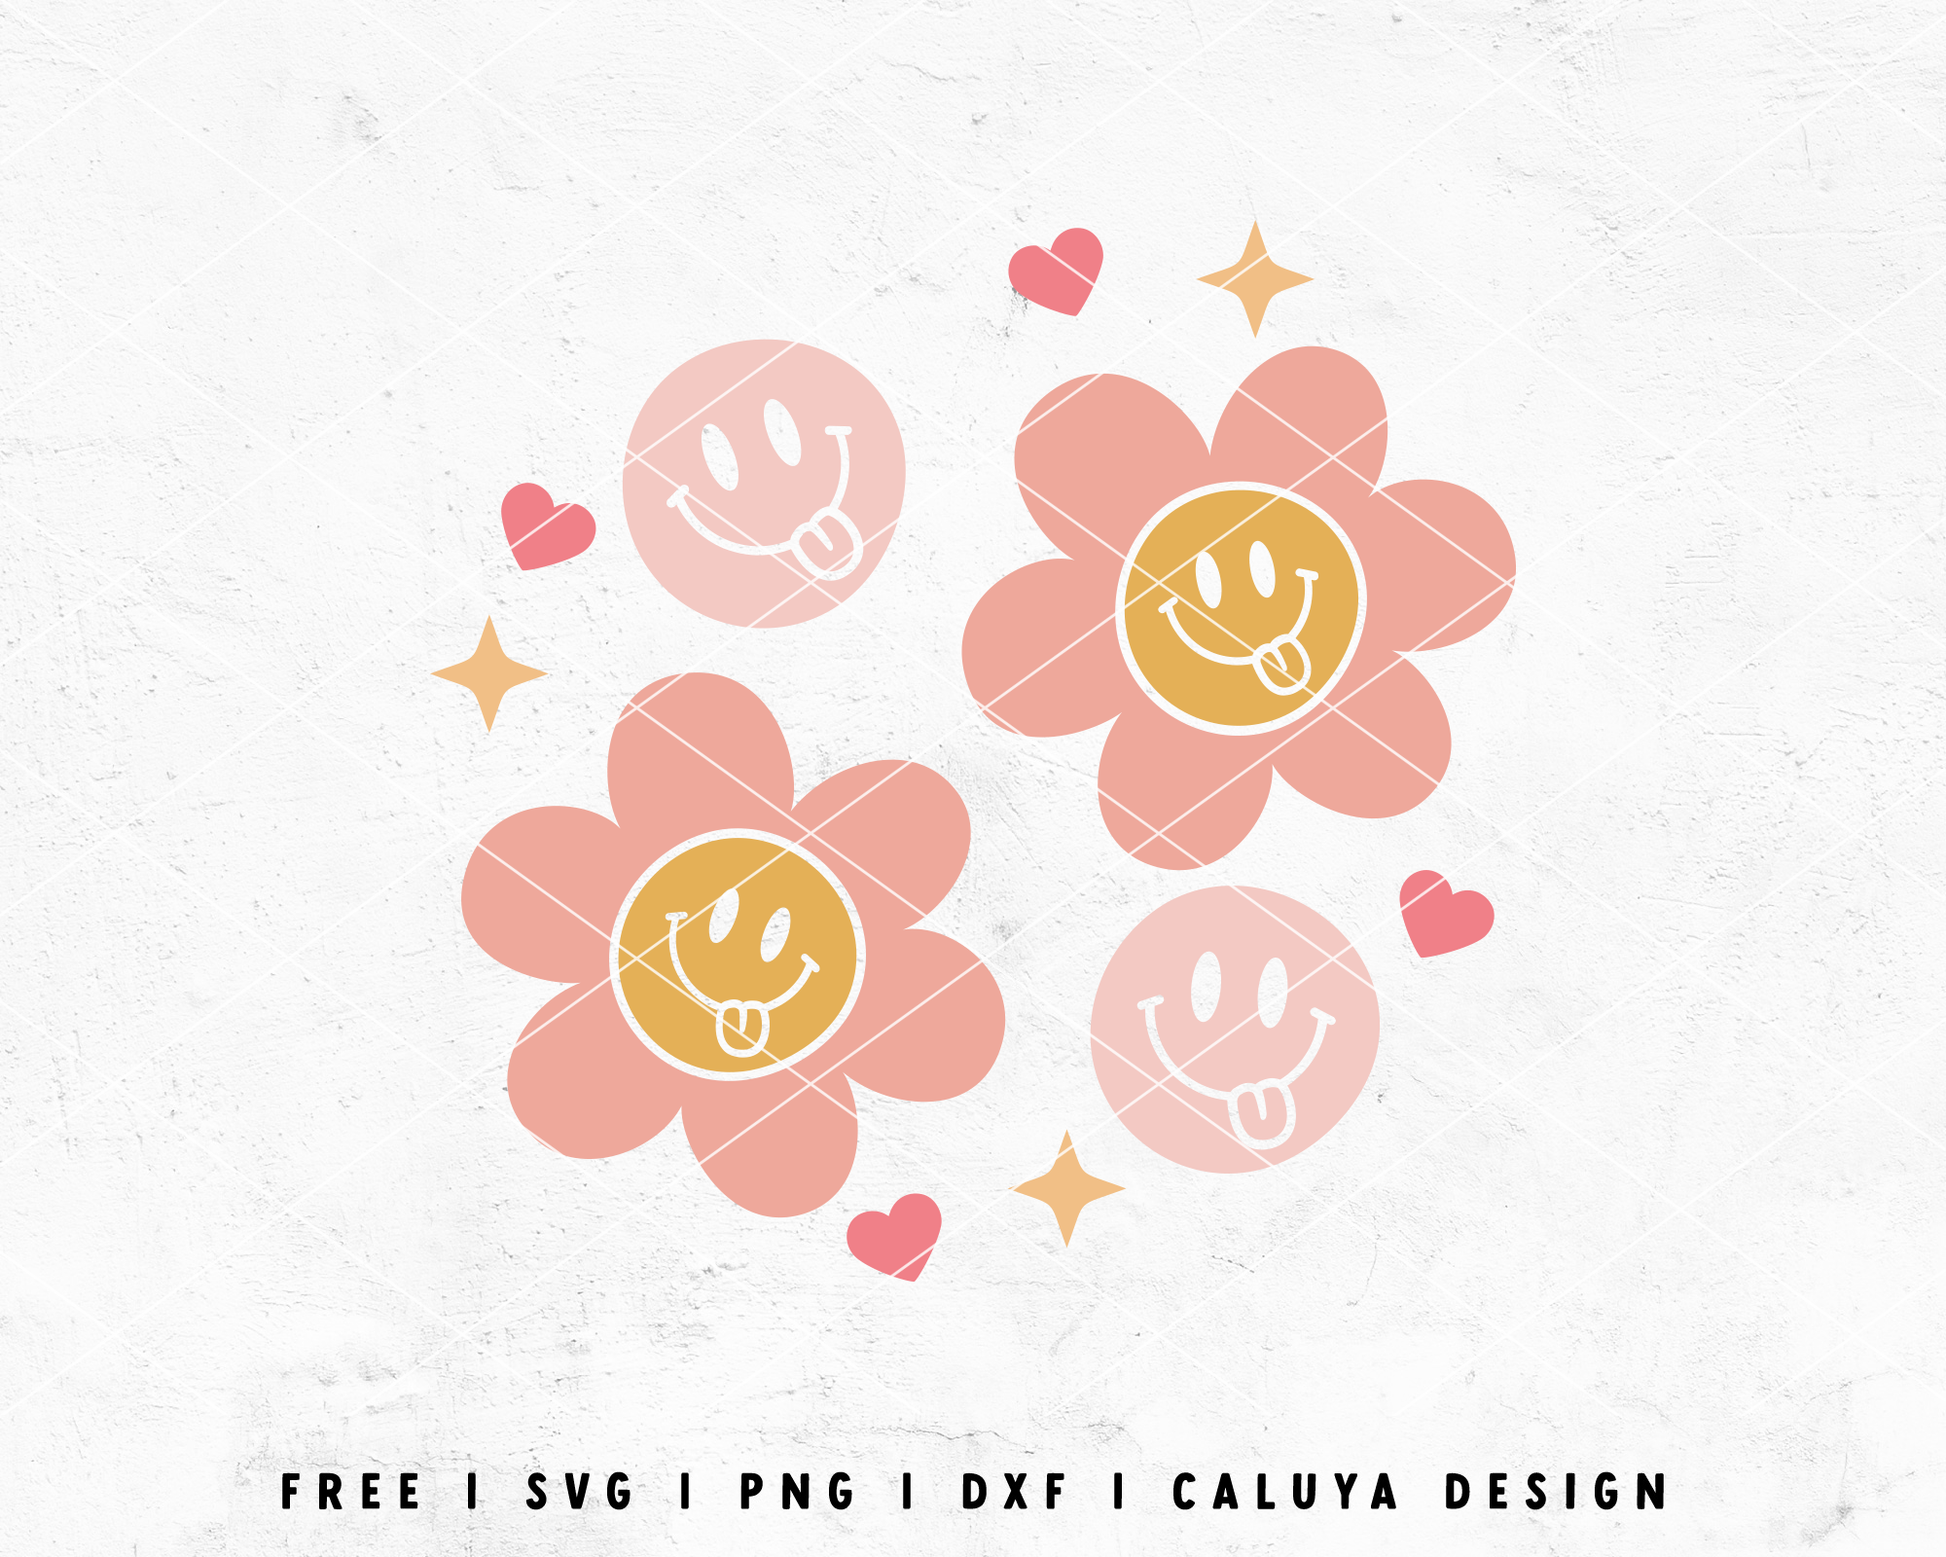 FREE Groovy Smiley Face SVG | Retro Flower SVG Cut File for Cricut, Cameo Silhouette | Free SVG Cut File